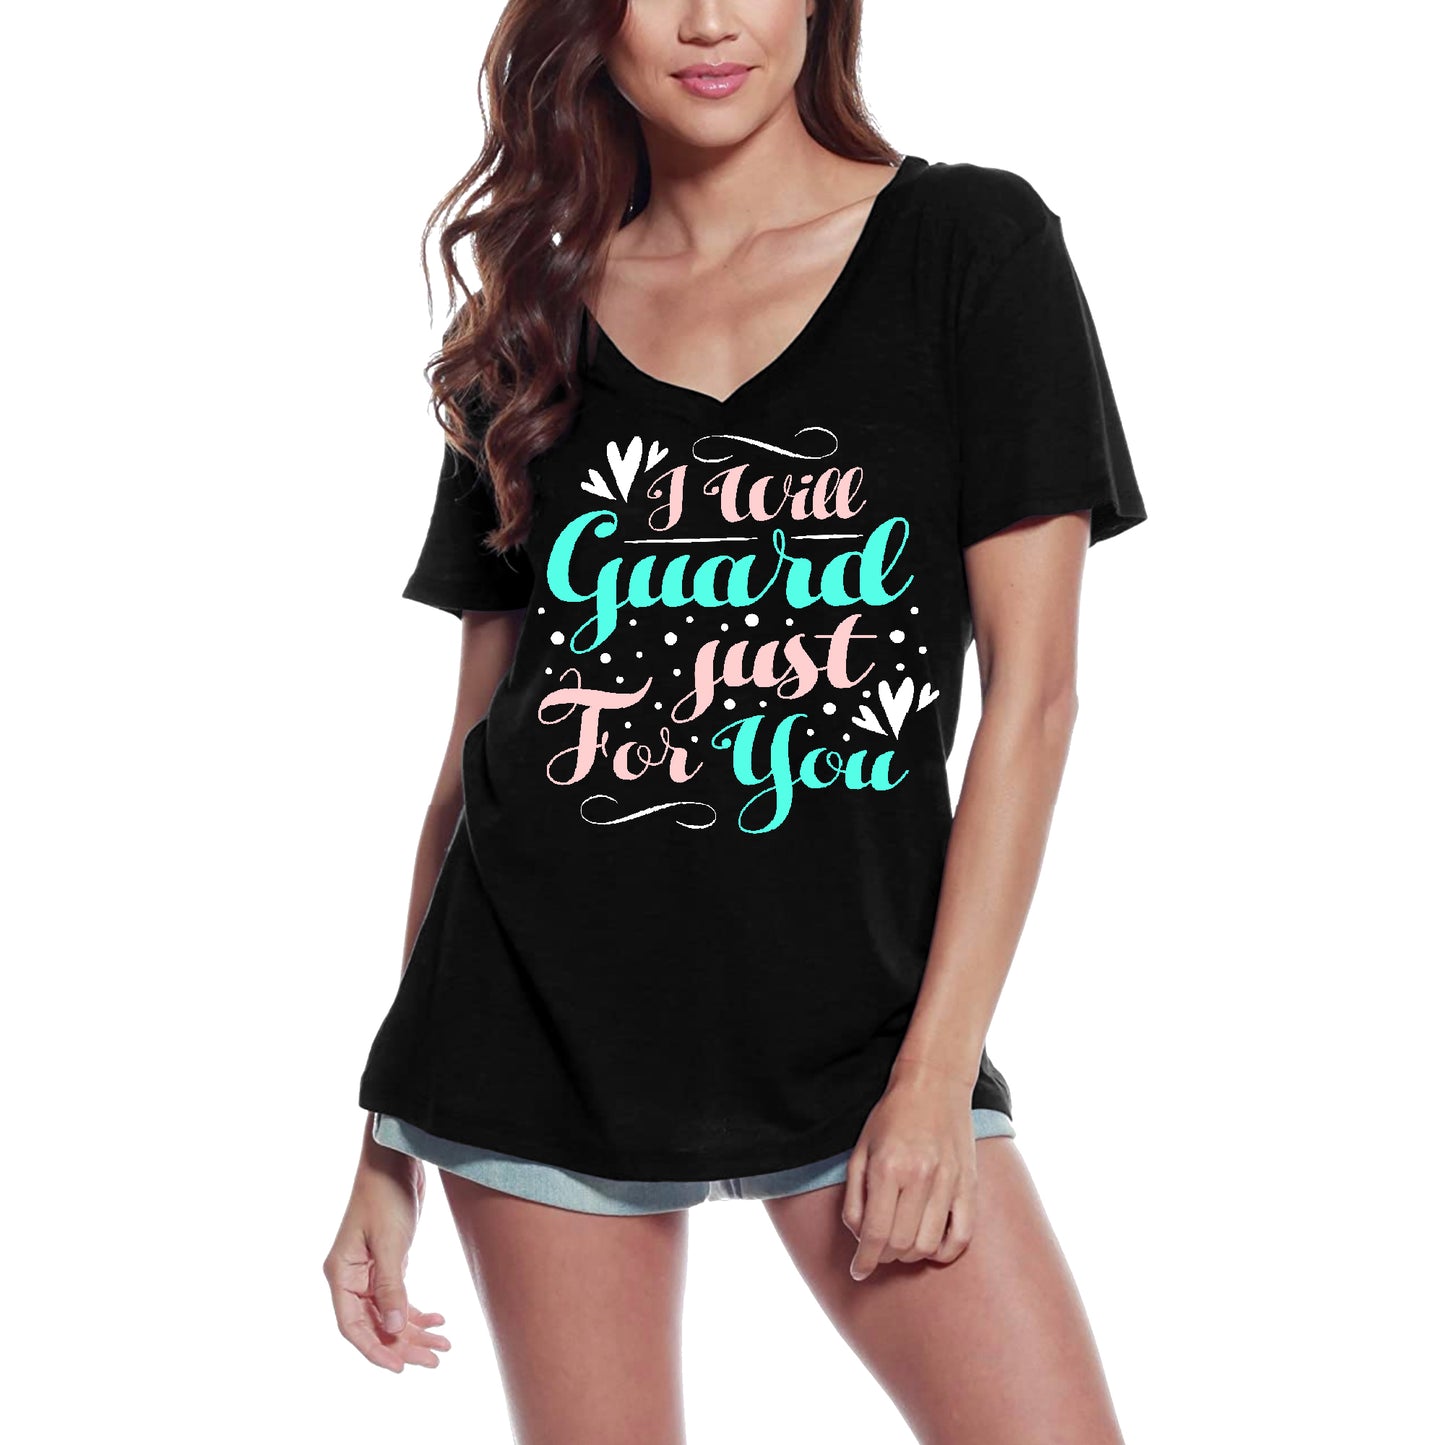 ULTRABASIC Women's T-Shirt Quote I Will Guard Just For You - Motivational Gift